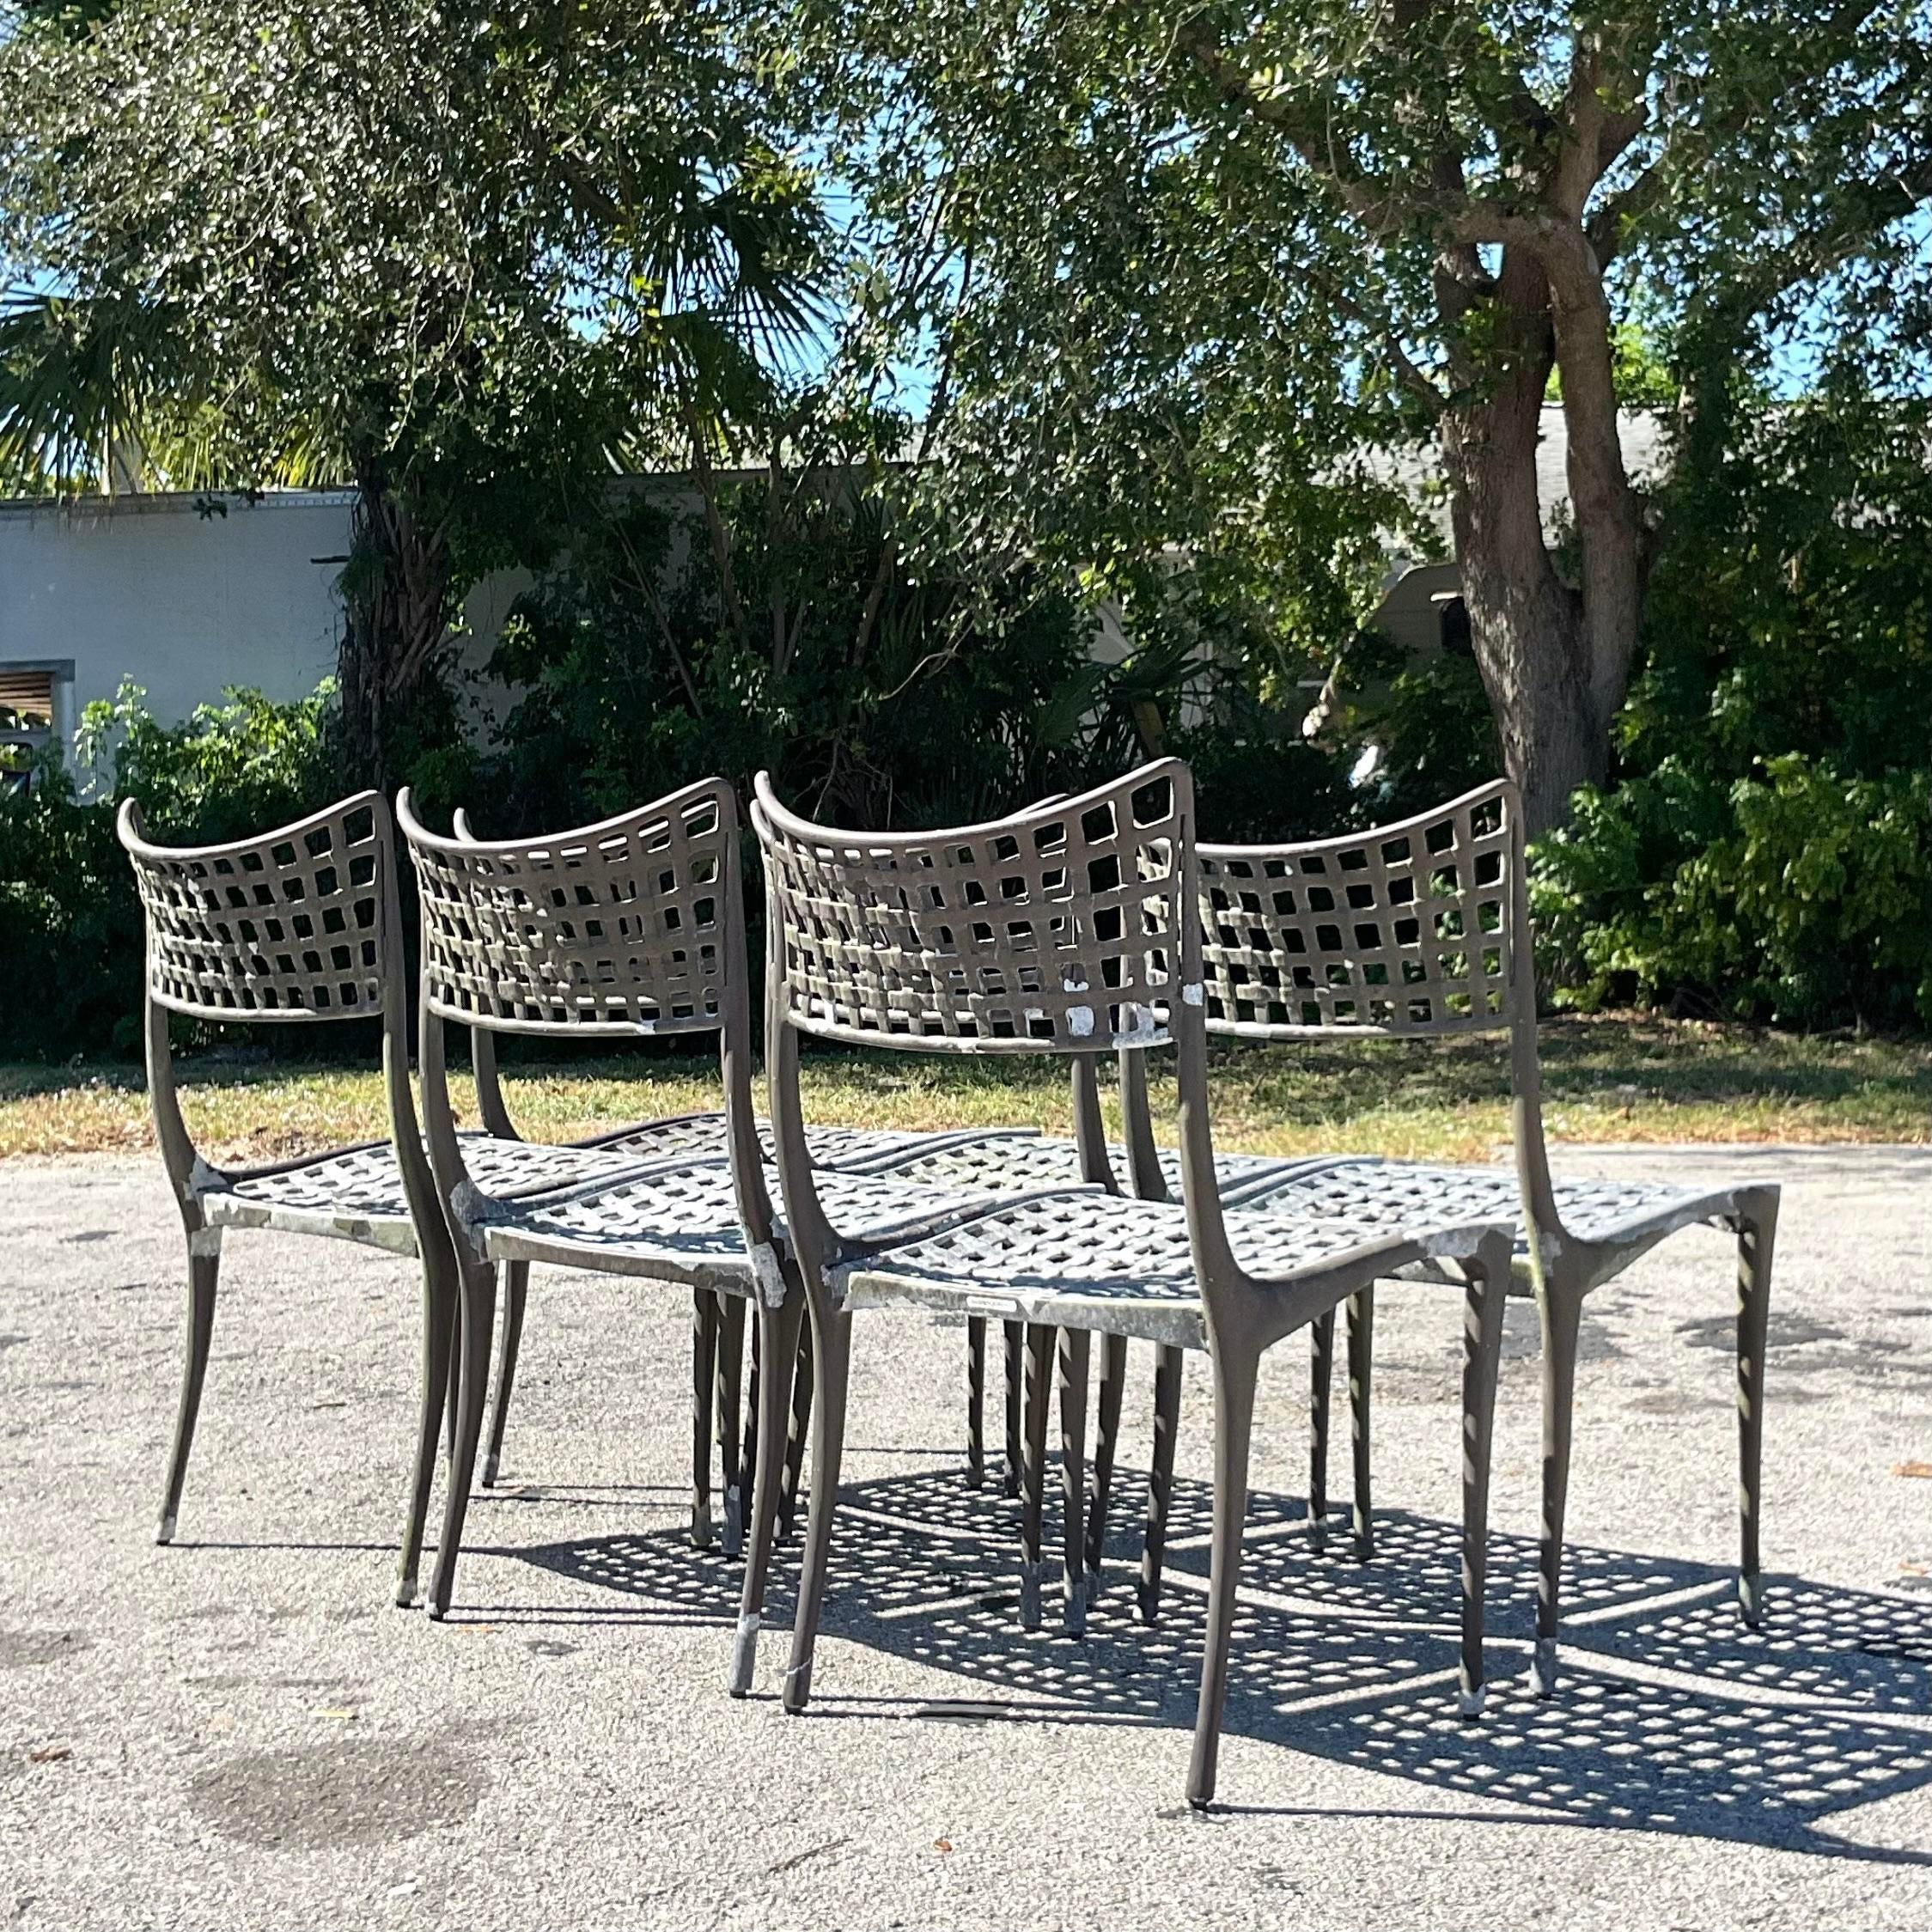 An incredible set of 6 outdoor dining chairs. Made by the iconic Brown Jordan group and tagged on the back. The rare and coveted Sol Y Luna design. The chairs are in great structural condition, but need to be repainted. Acquired from a Palm Beach